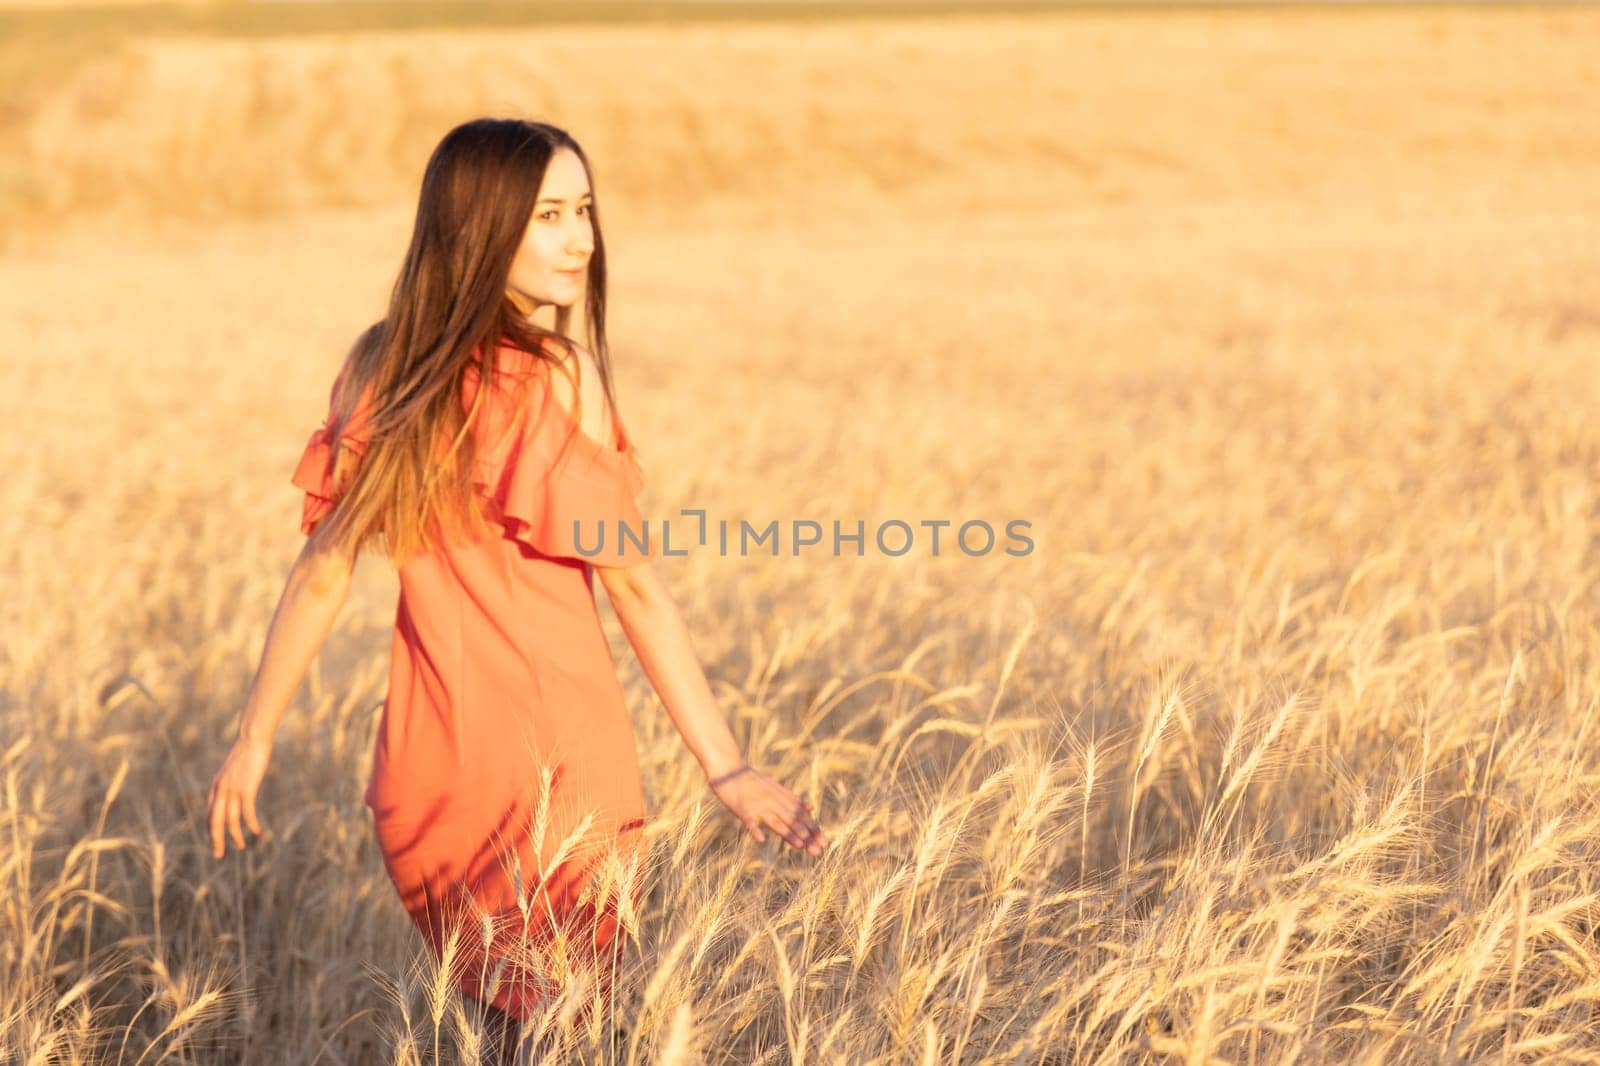 Young woman in the wheat field. Look back. Finding inner balance concept. Copy space.